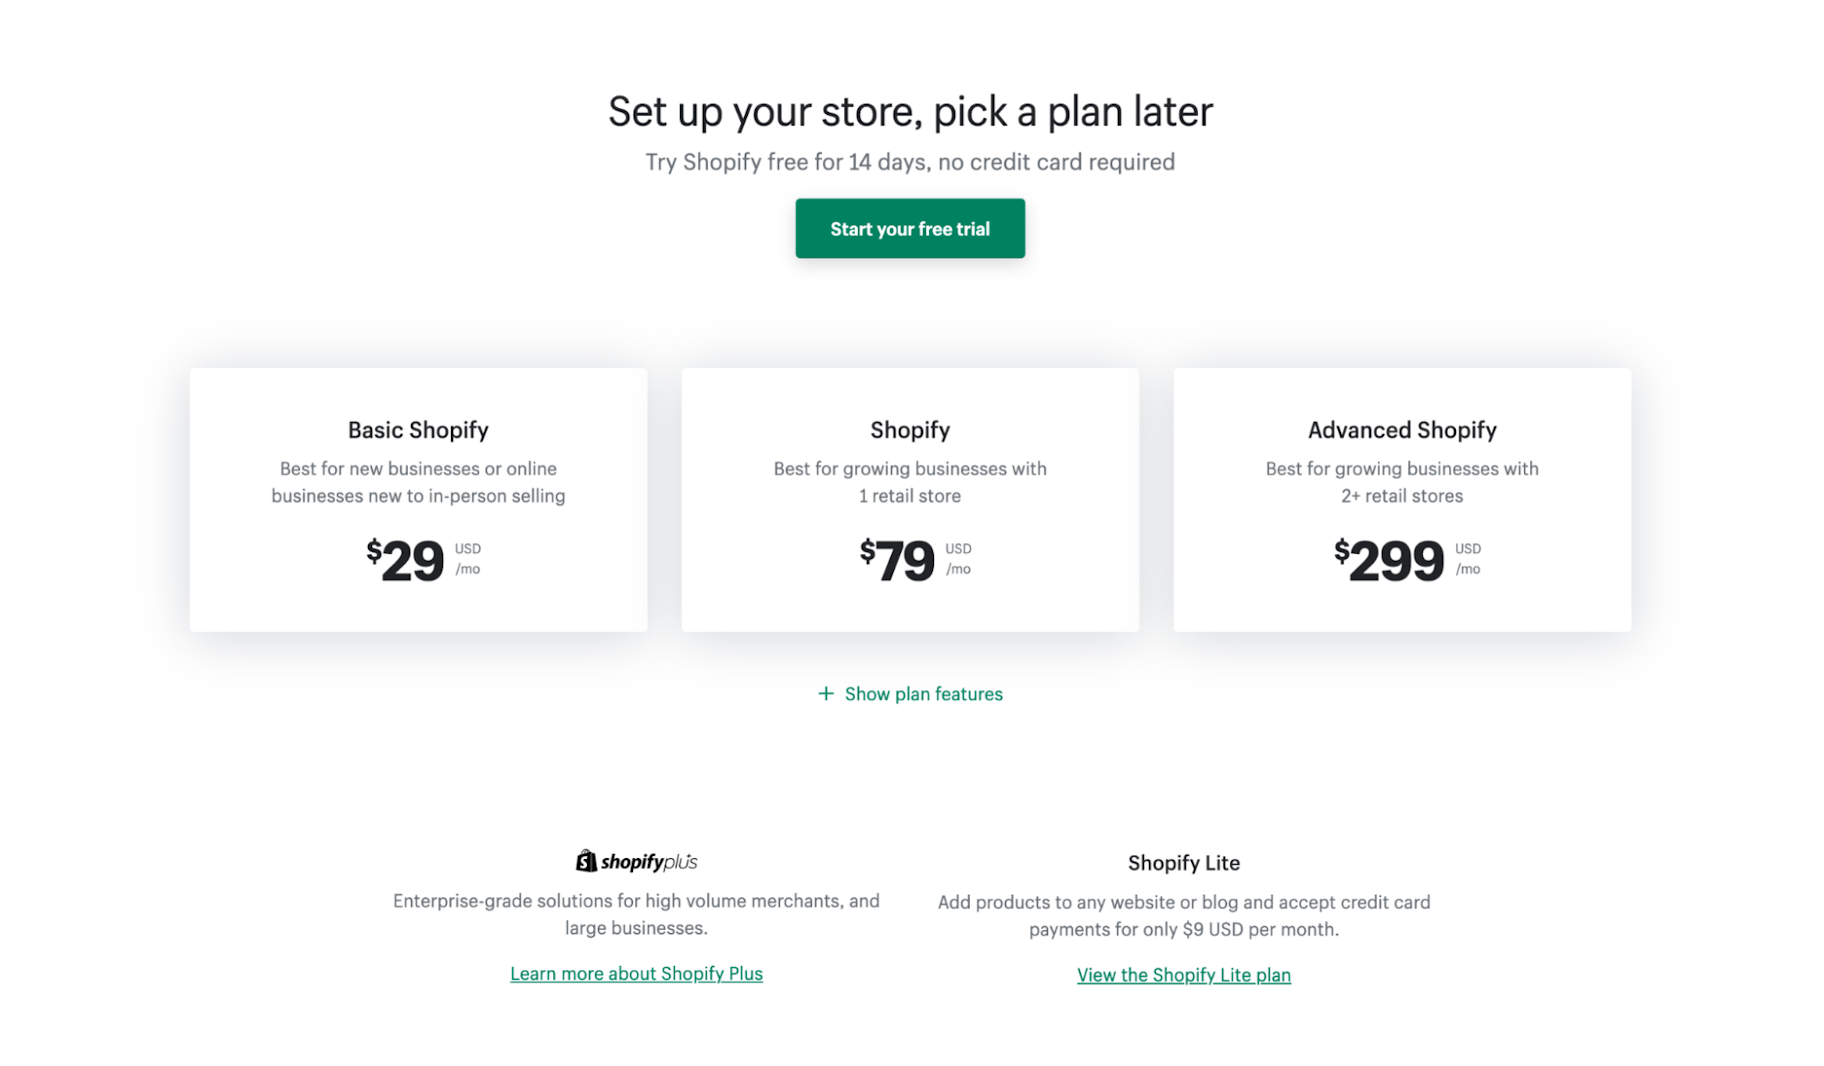 Shopify Pricing Plans